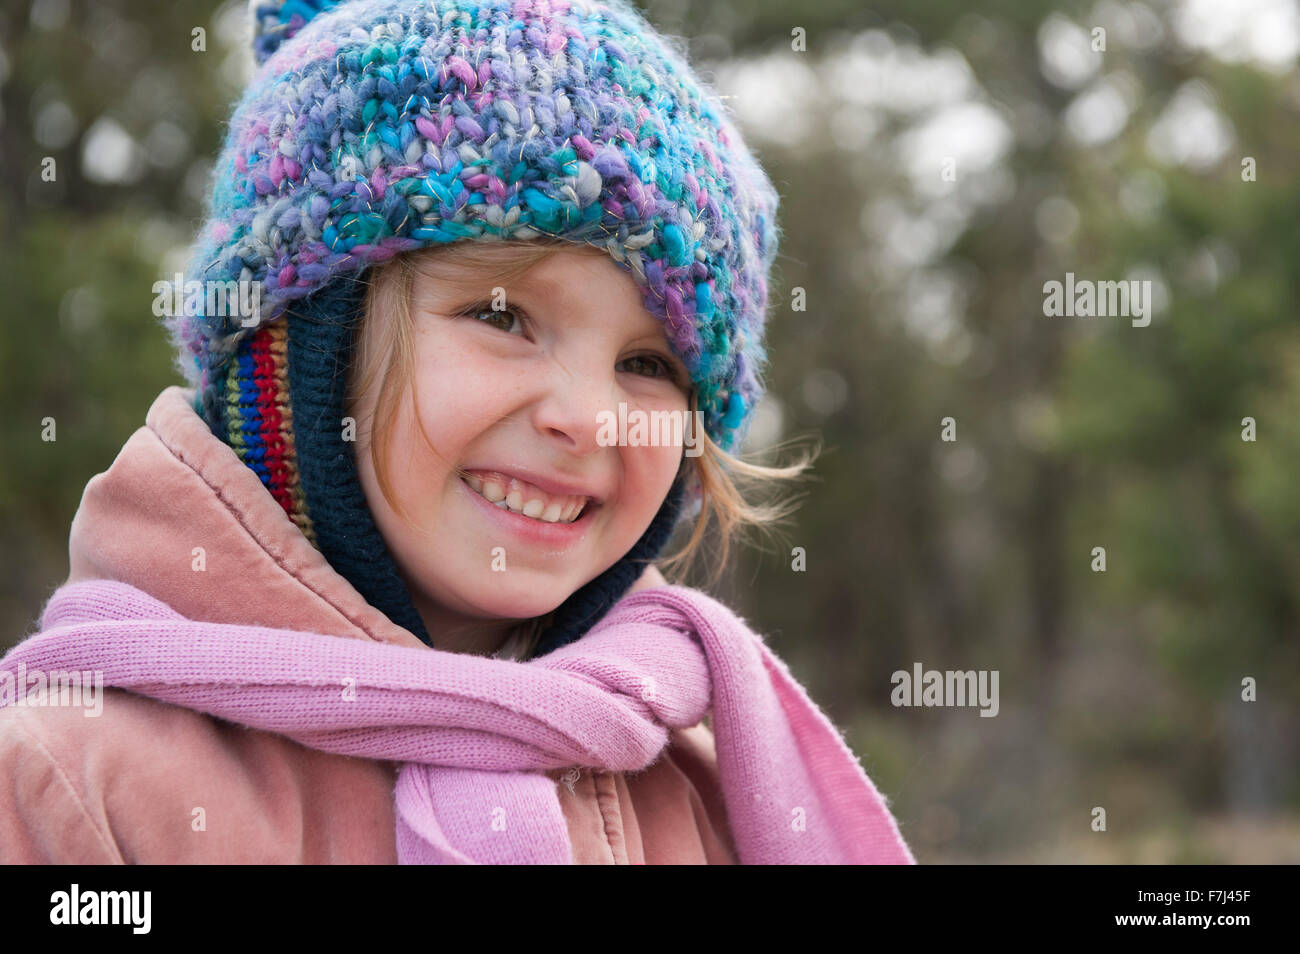 Little girl wearing knit hat and scarf, smiling, portrait Stock Photo